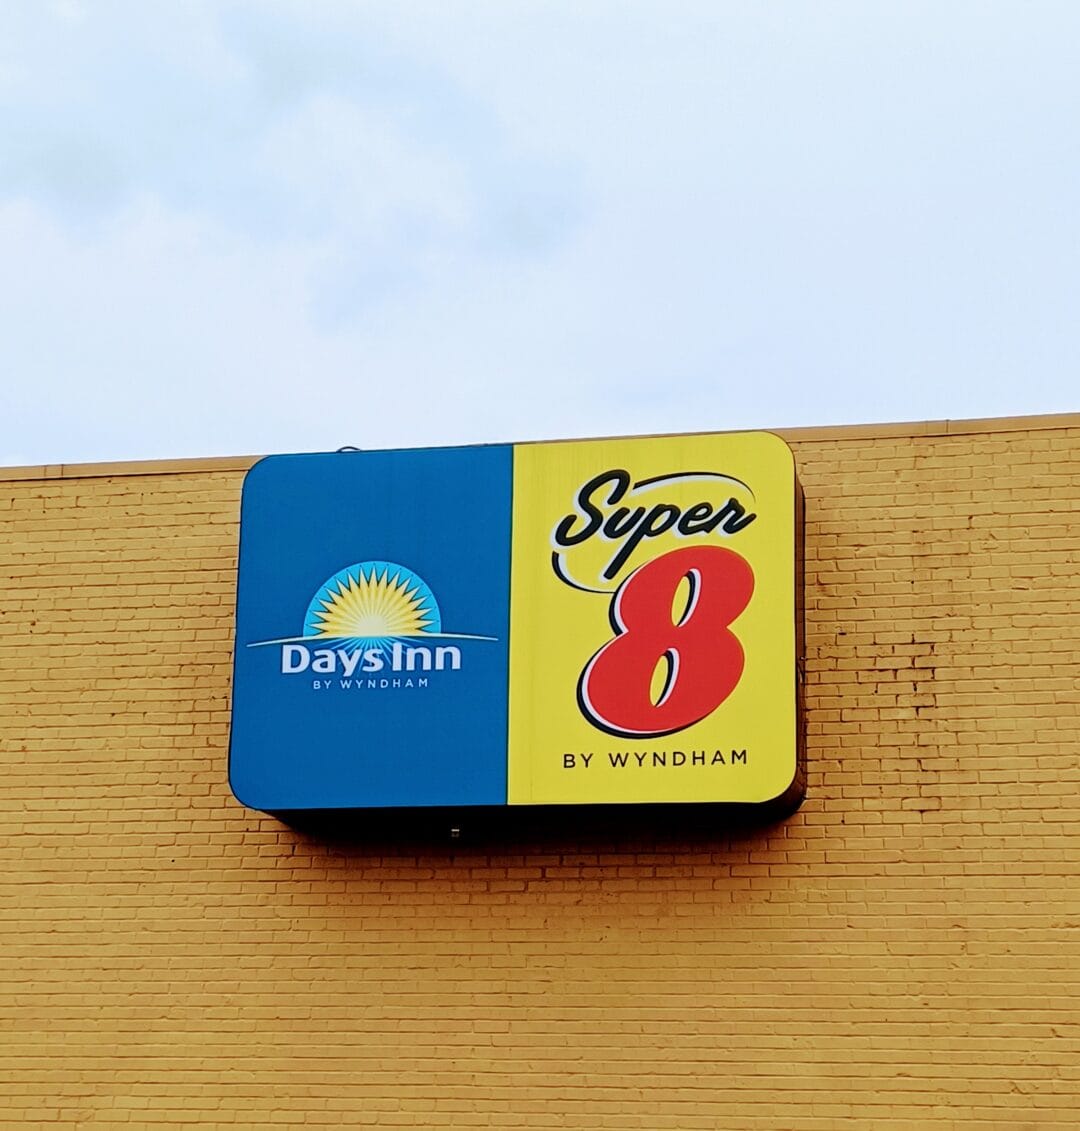 a sign for a days inn and super 8 on a yellow brick building